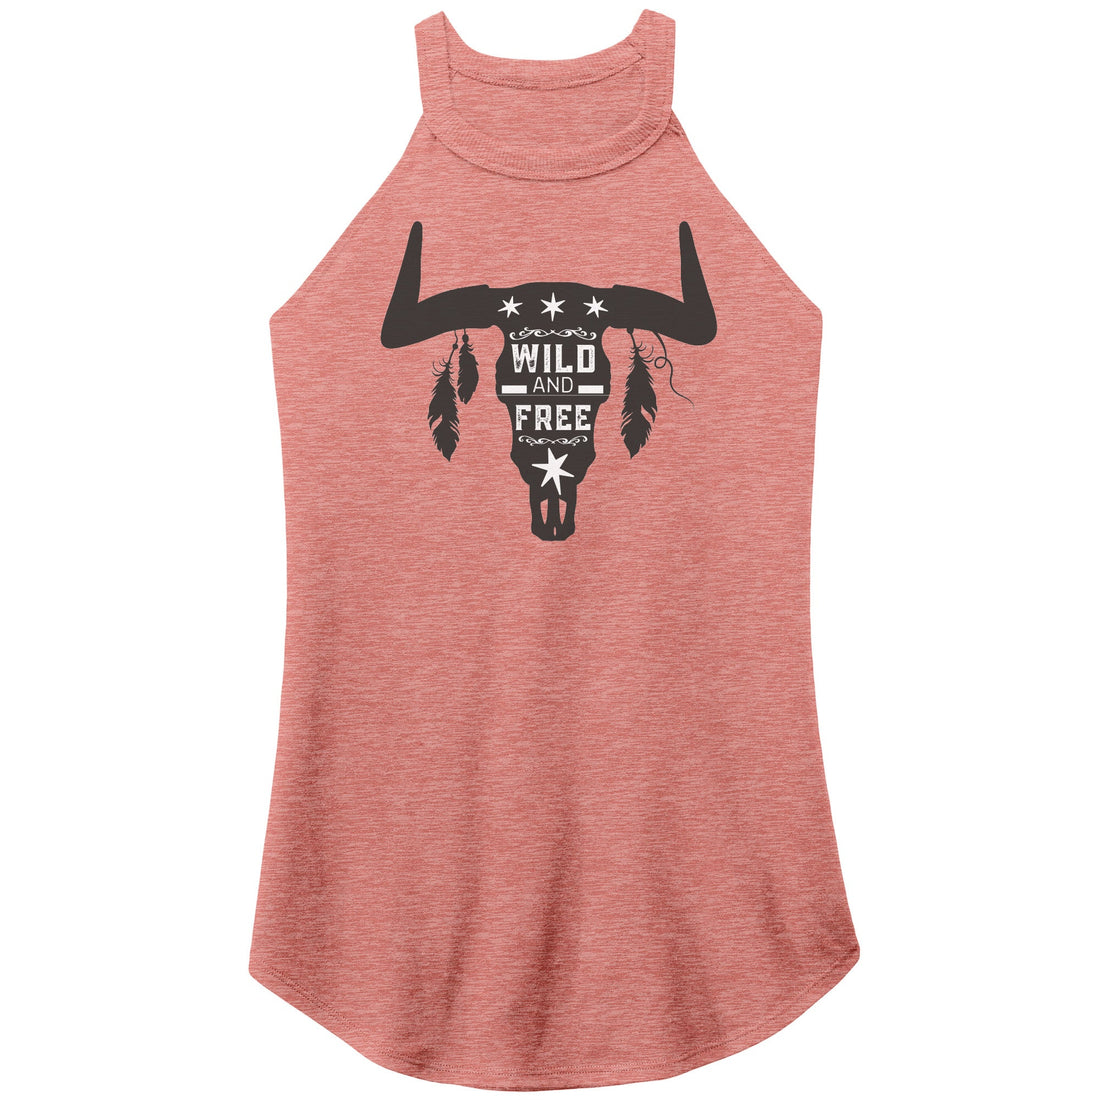 Wild and Free Rocker Tank - Apparel - Positively Sassy - Wild and Free Rocker Tank